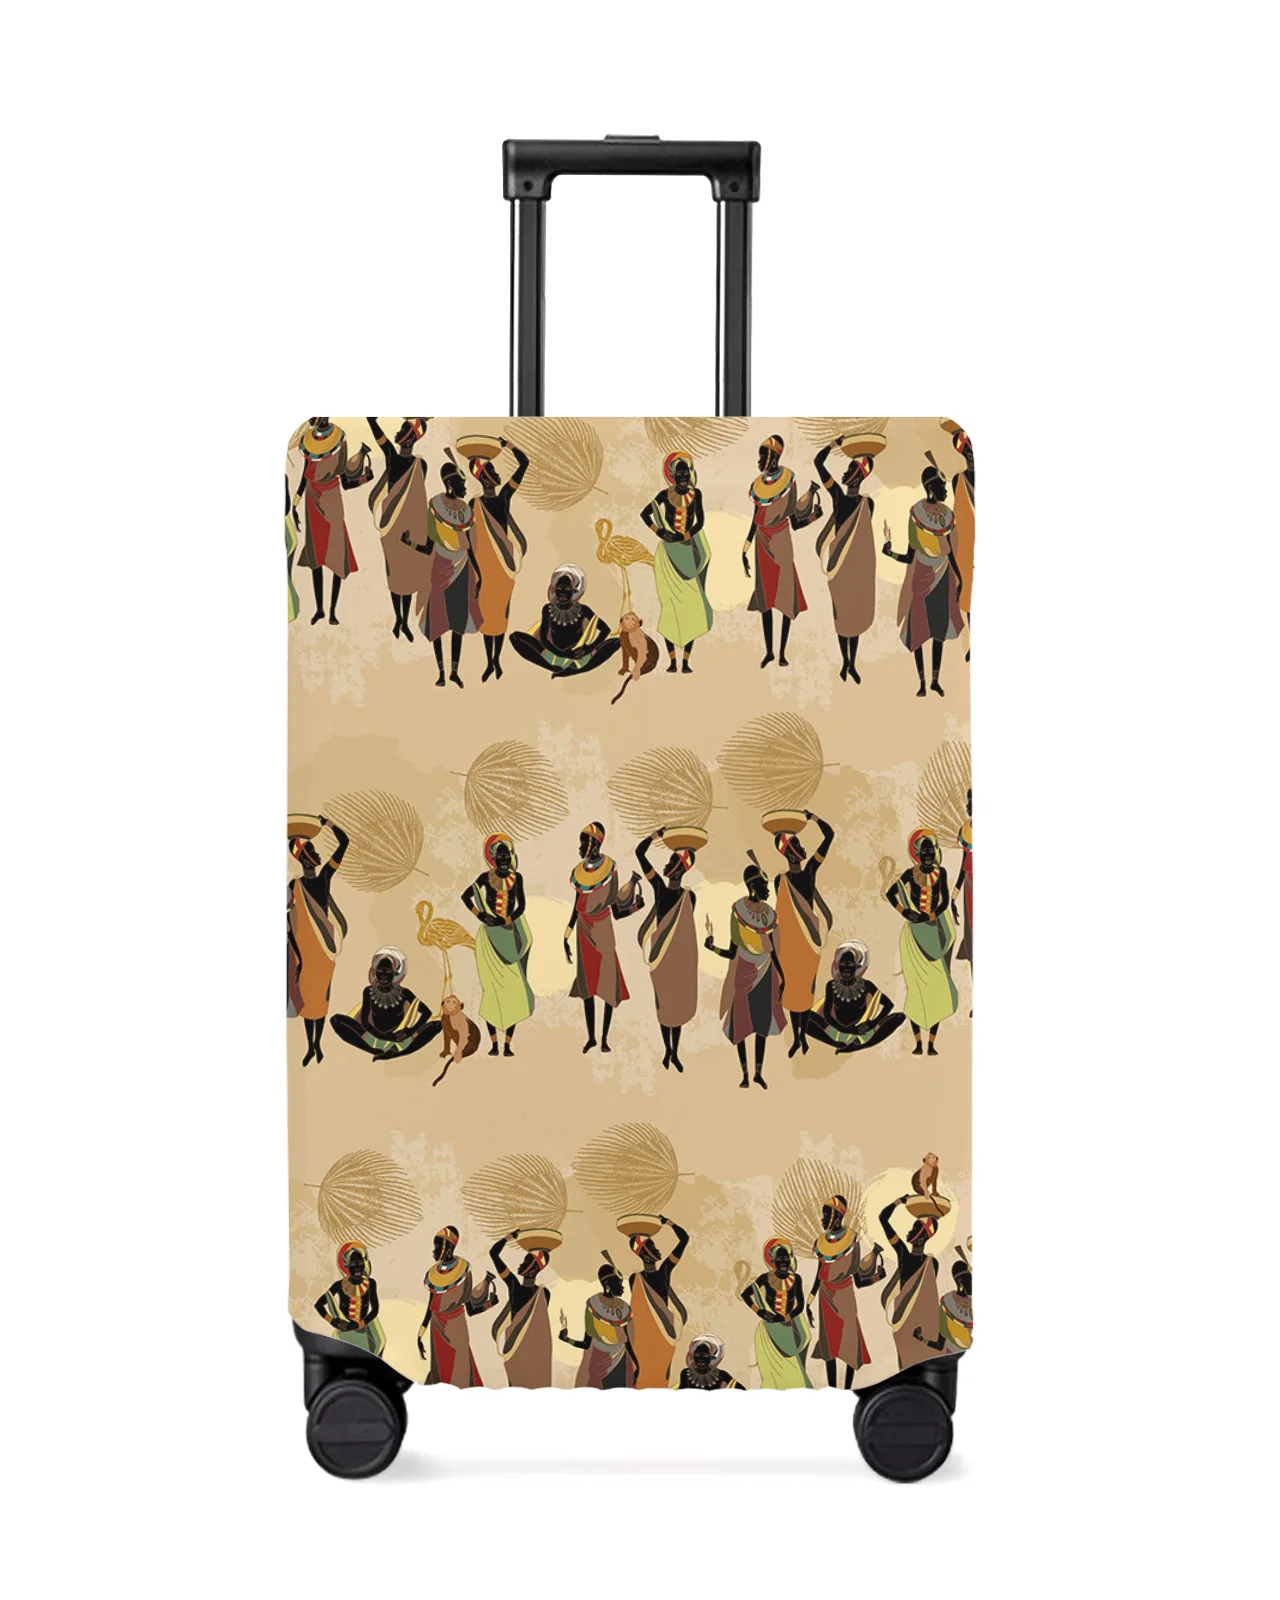 ethnic-style-african-women-black-women-luggage-cover-stretch-baggage-protector-dust-cover-for-18-32-inch-travel-suitcase-case